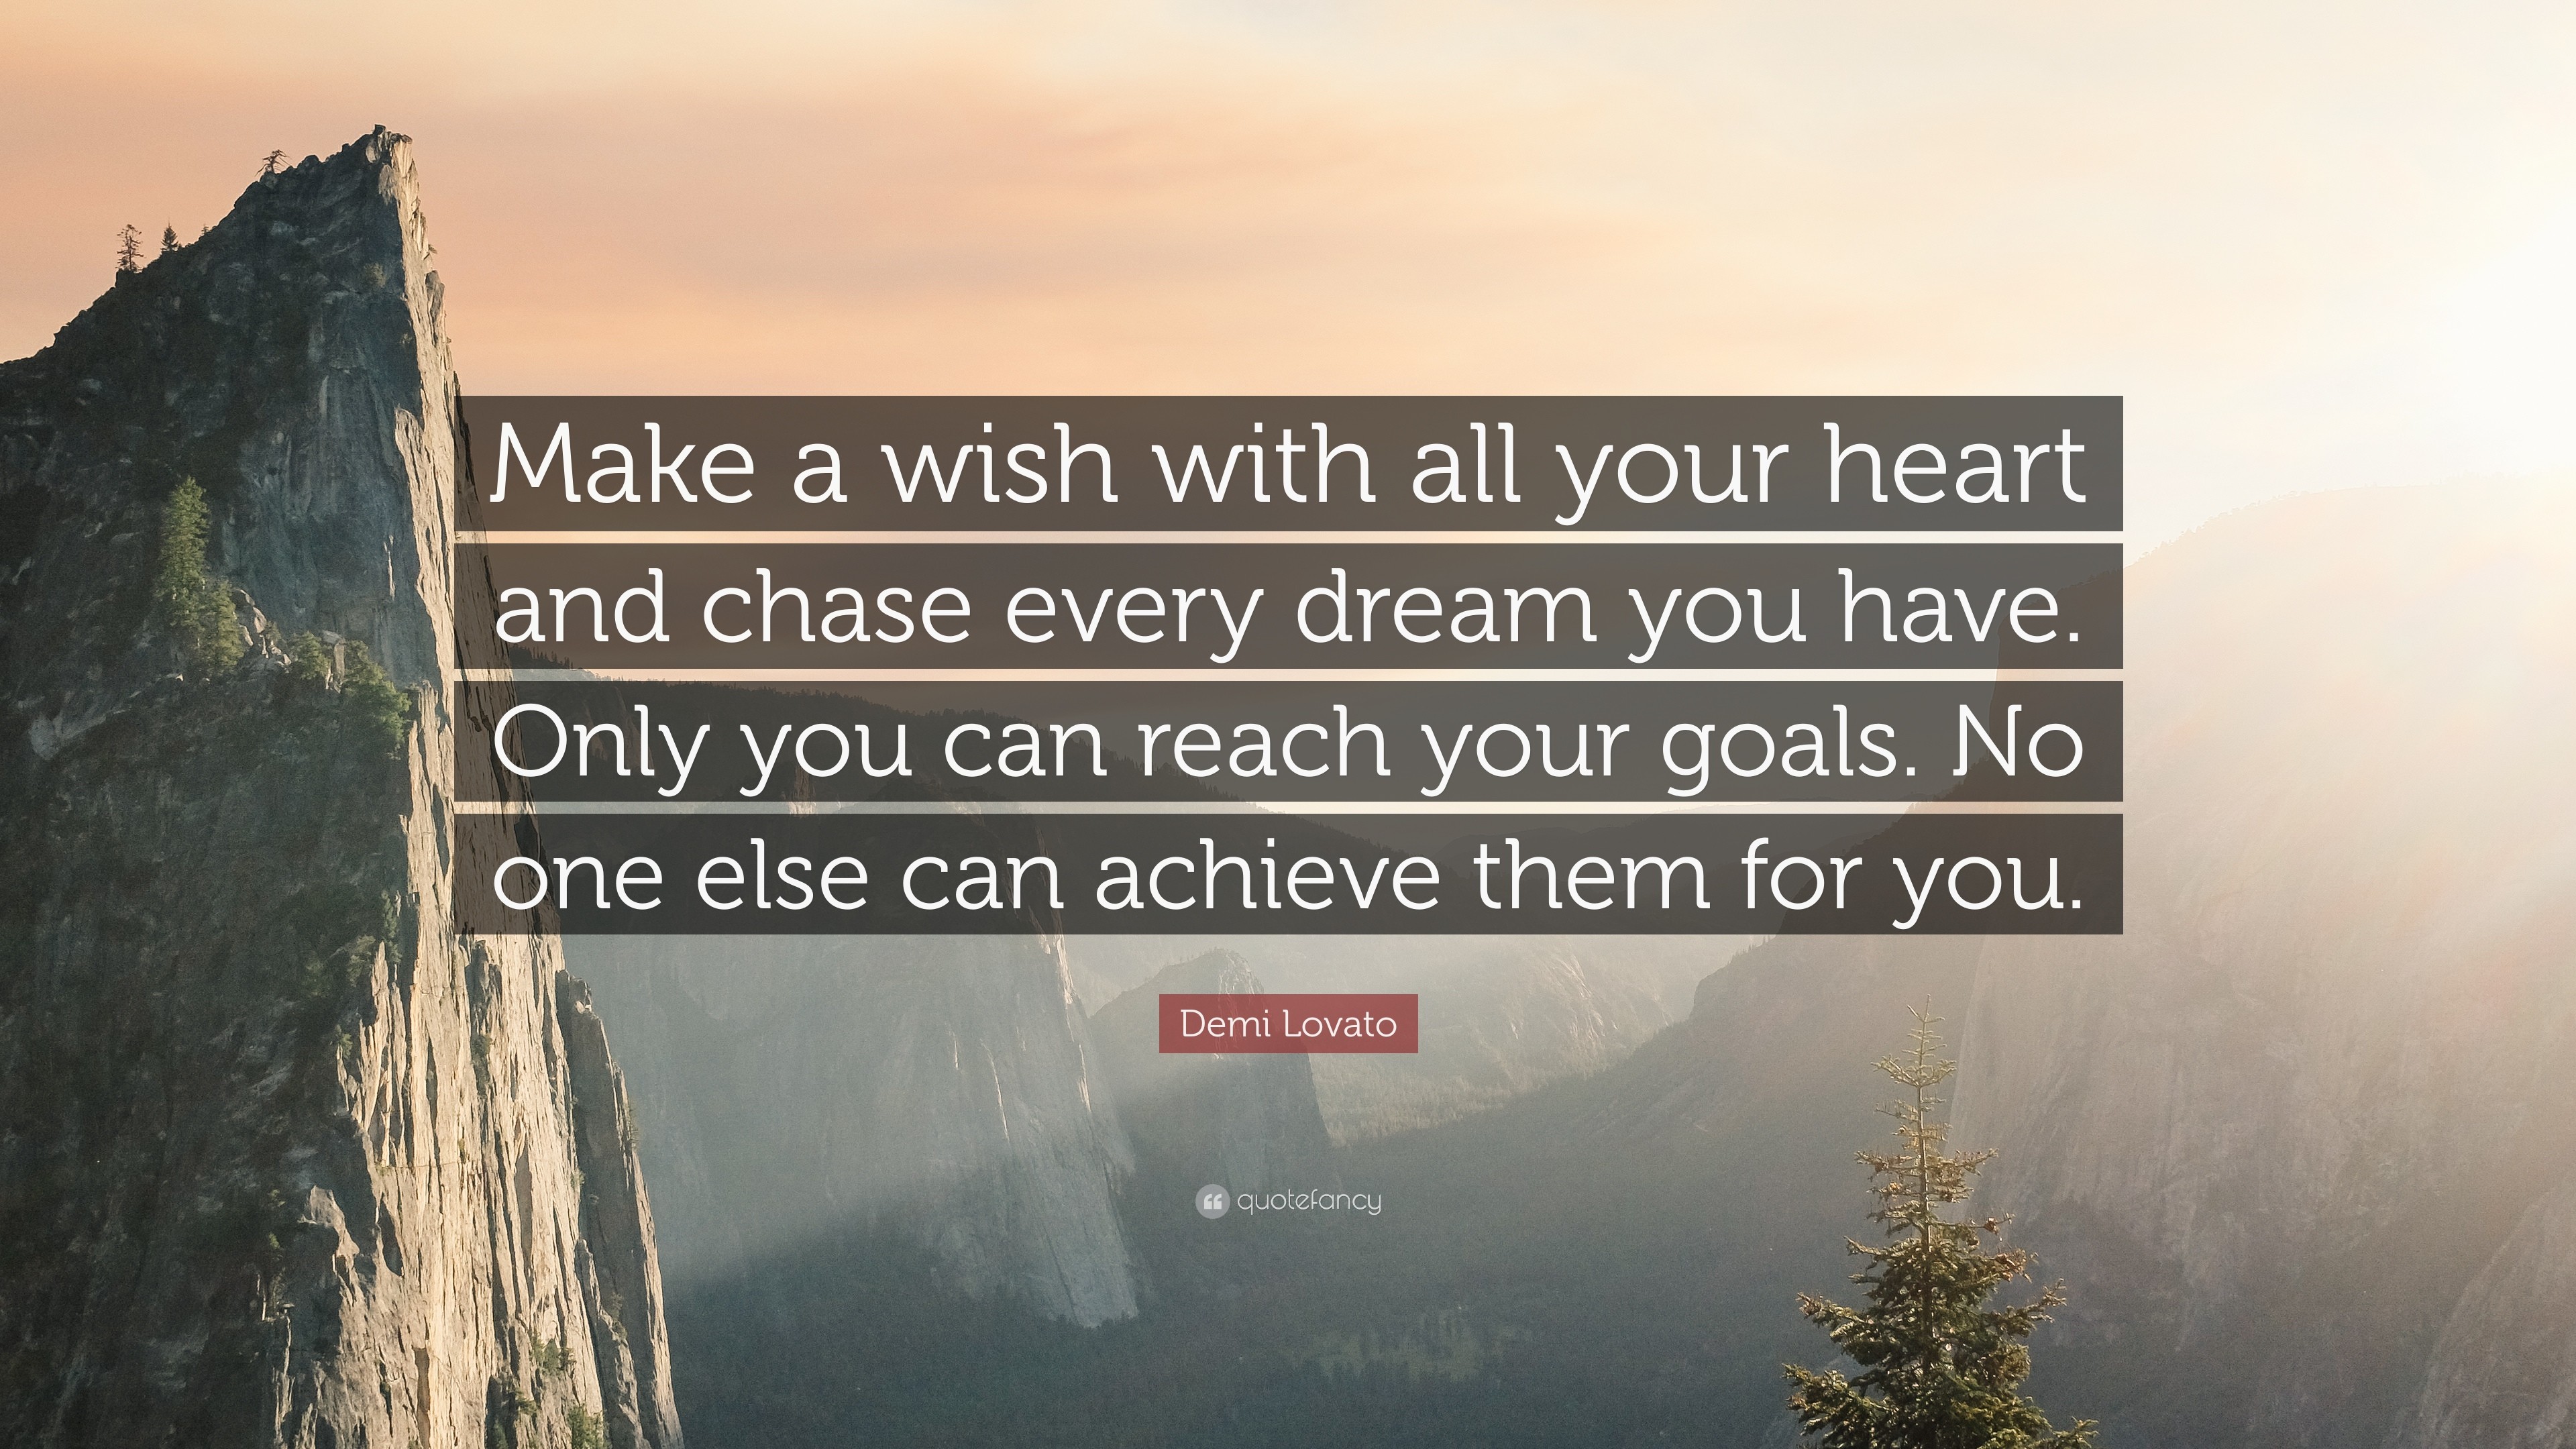 3840x2160 Goal Quotes: “Make a wish with all your heart and chase every dream you